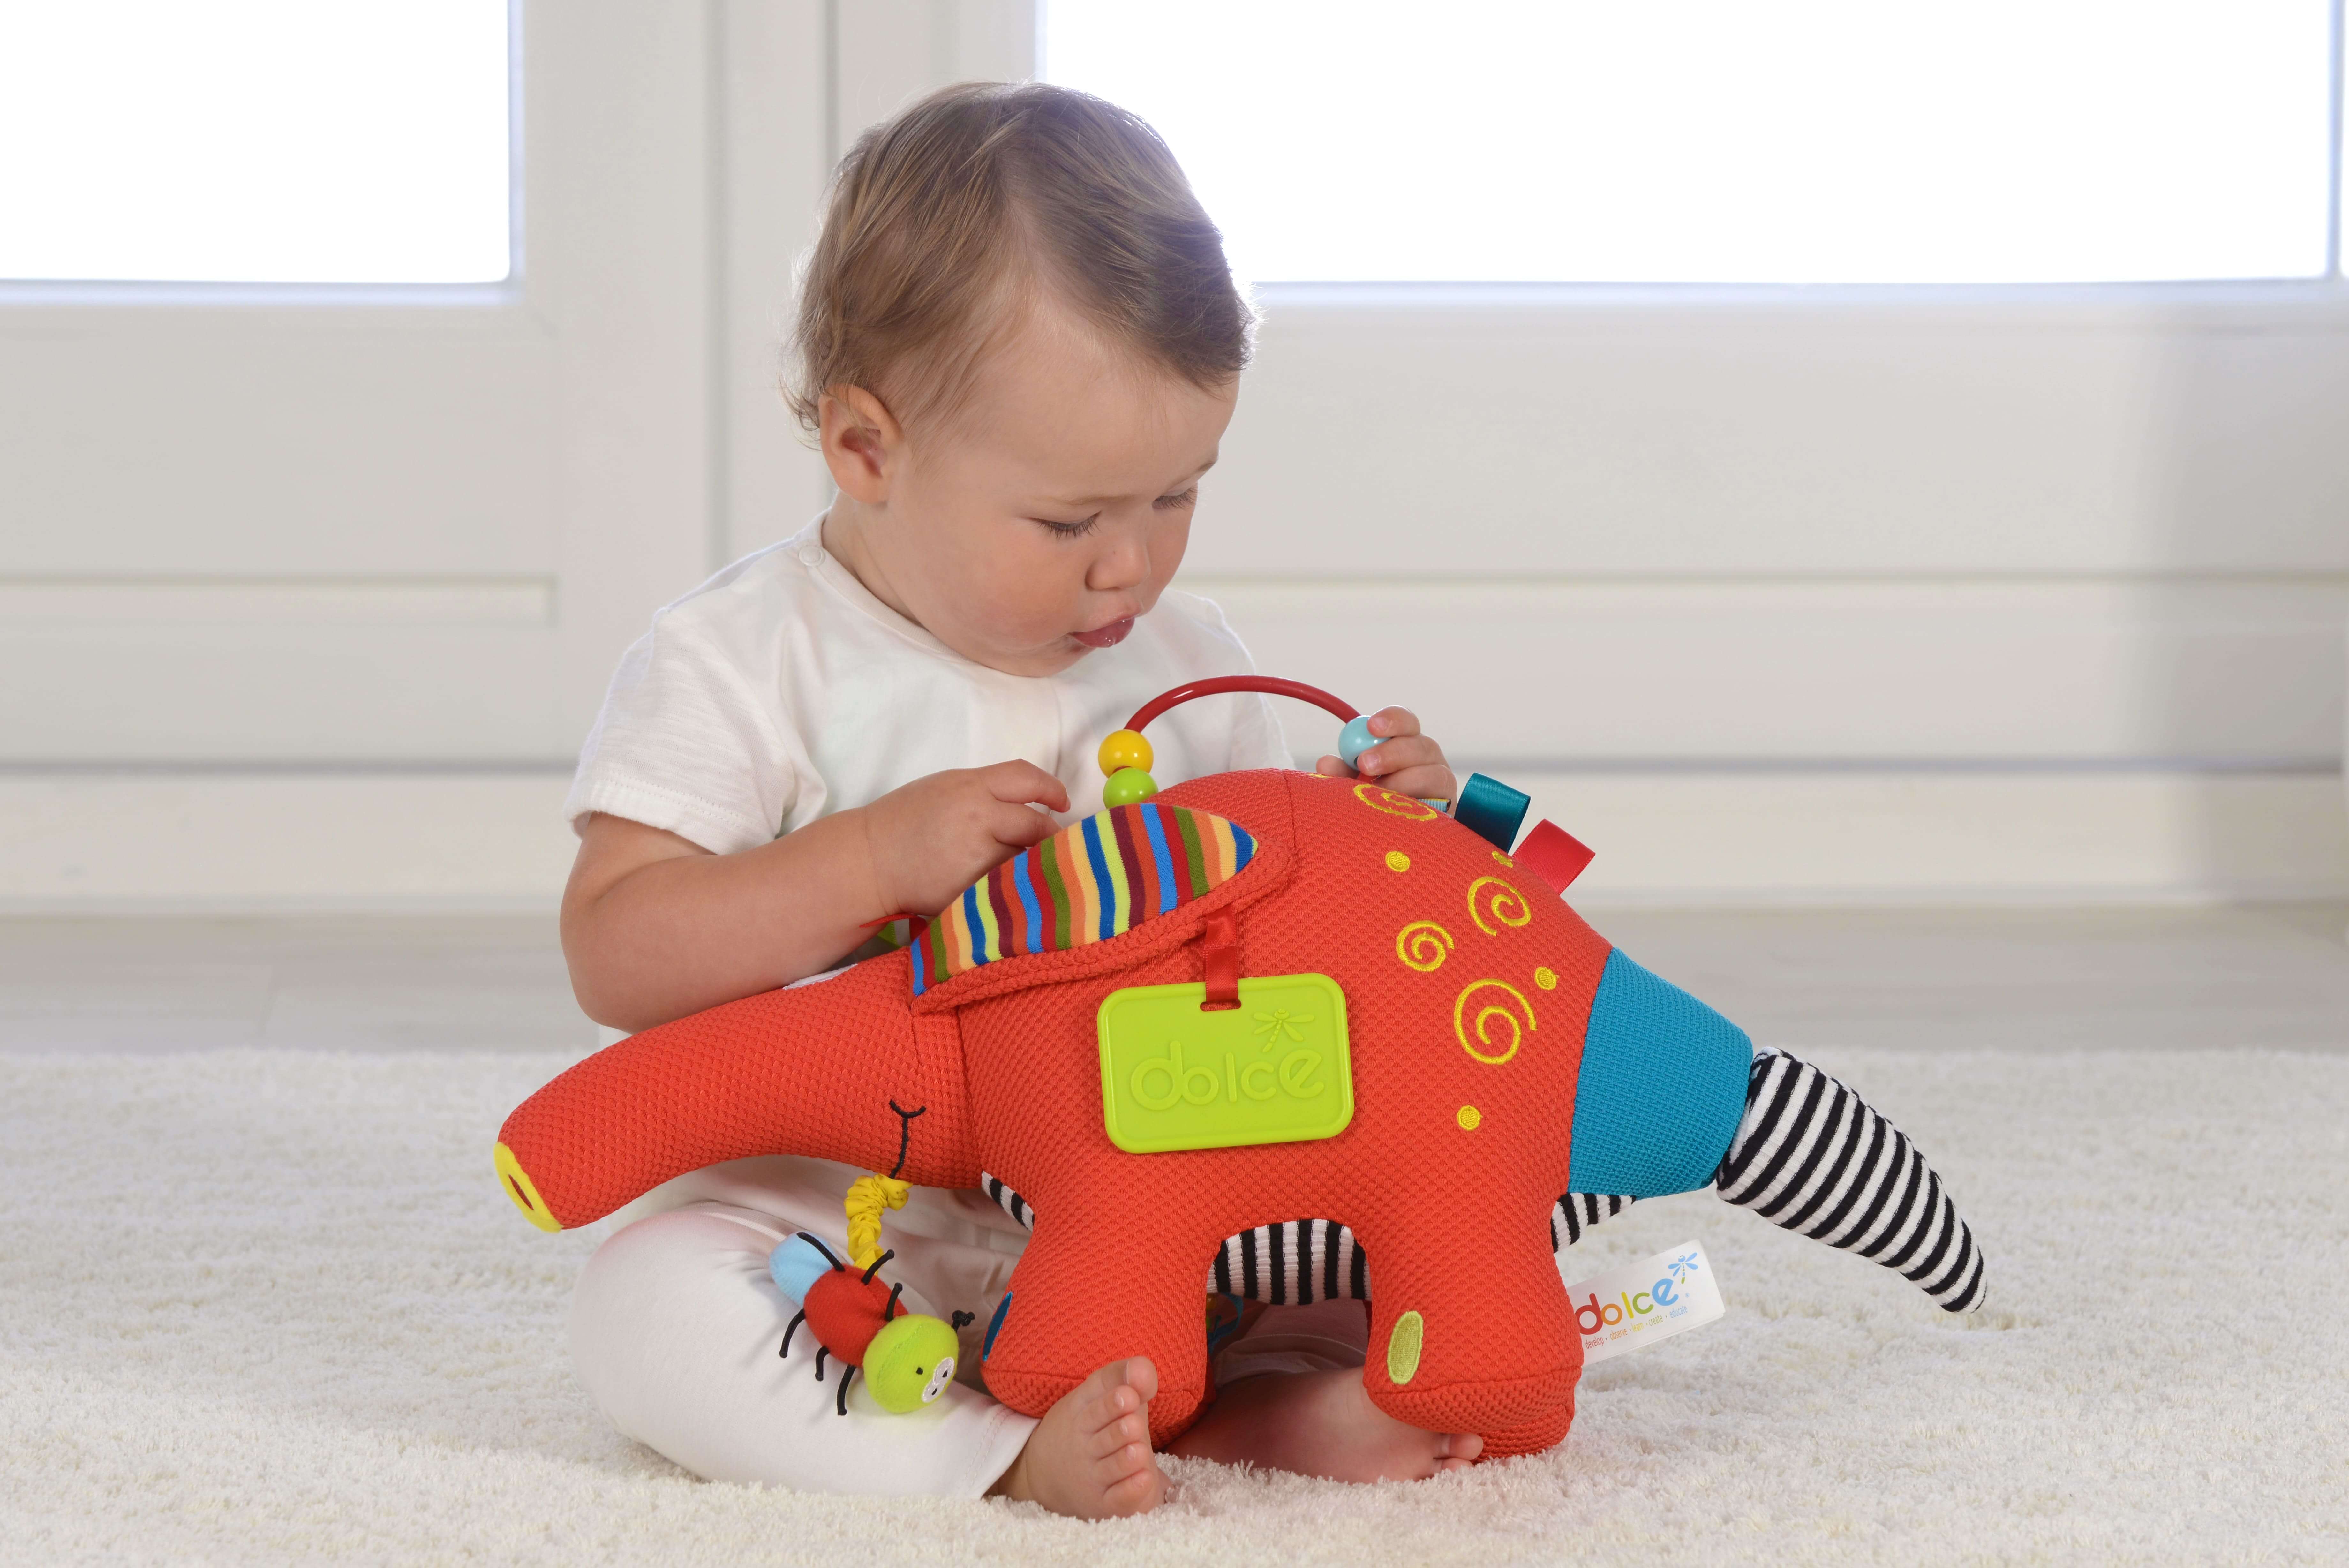 Best Baby Development Toys 2015: Your Guide to Enhancing Your Baby’s Skills